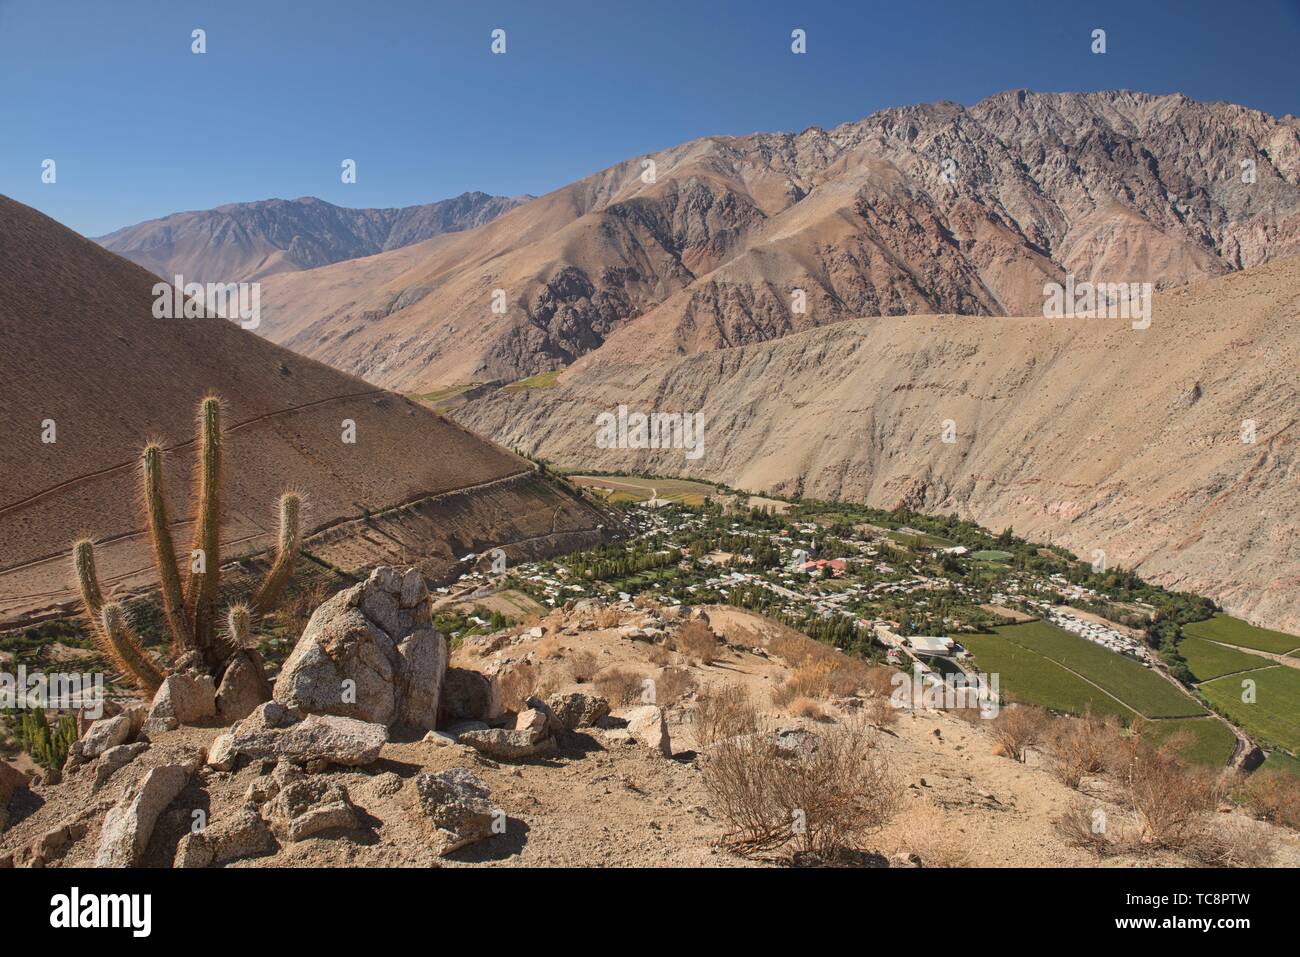 View of scenic Pisco Elqui town in the Elqui Valley, Chile. Stock Photo